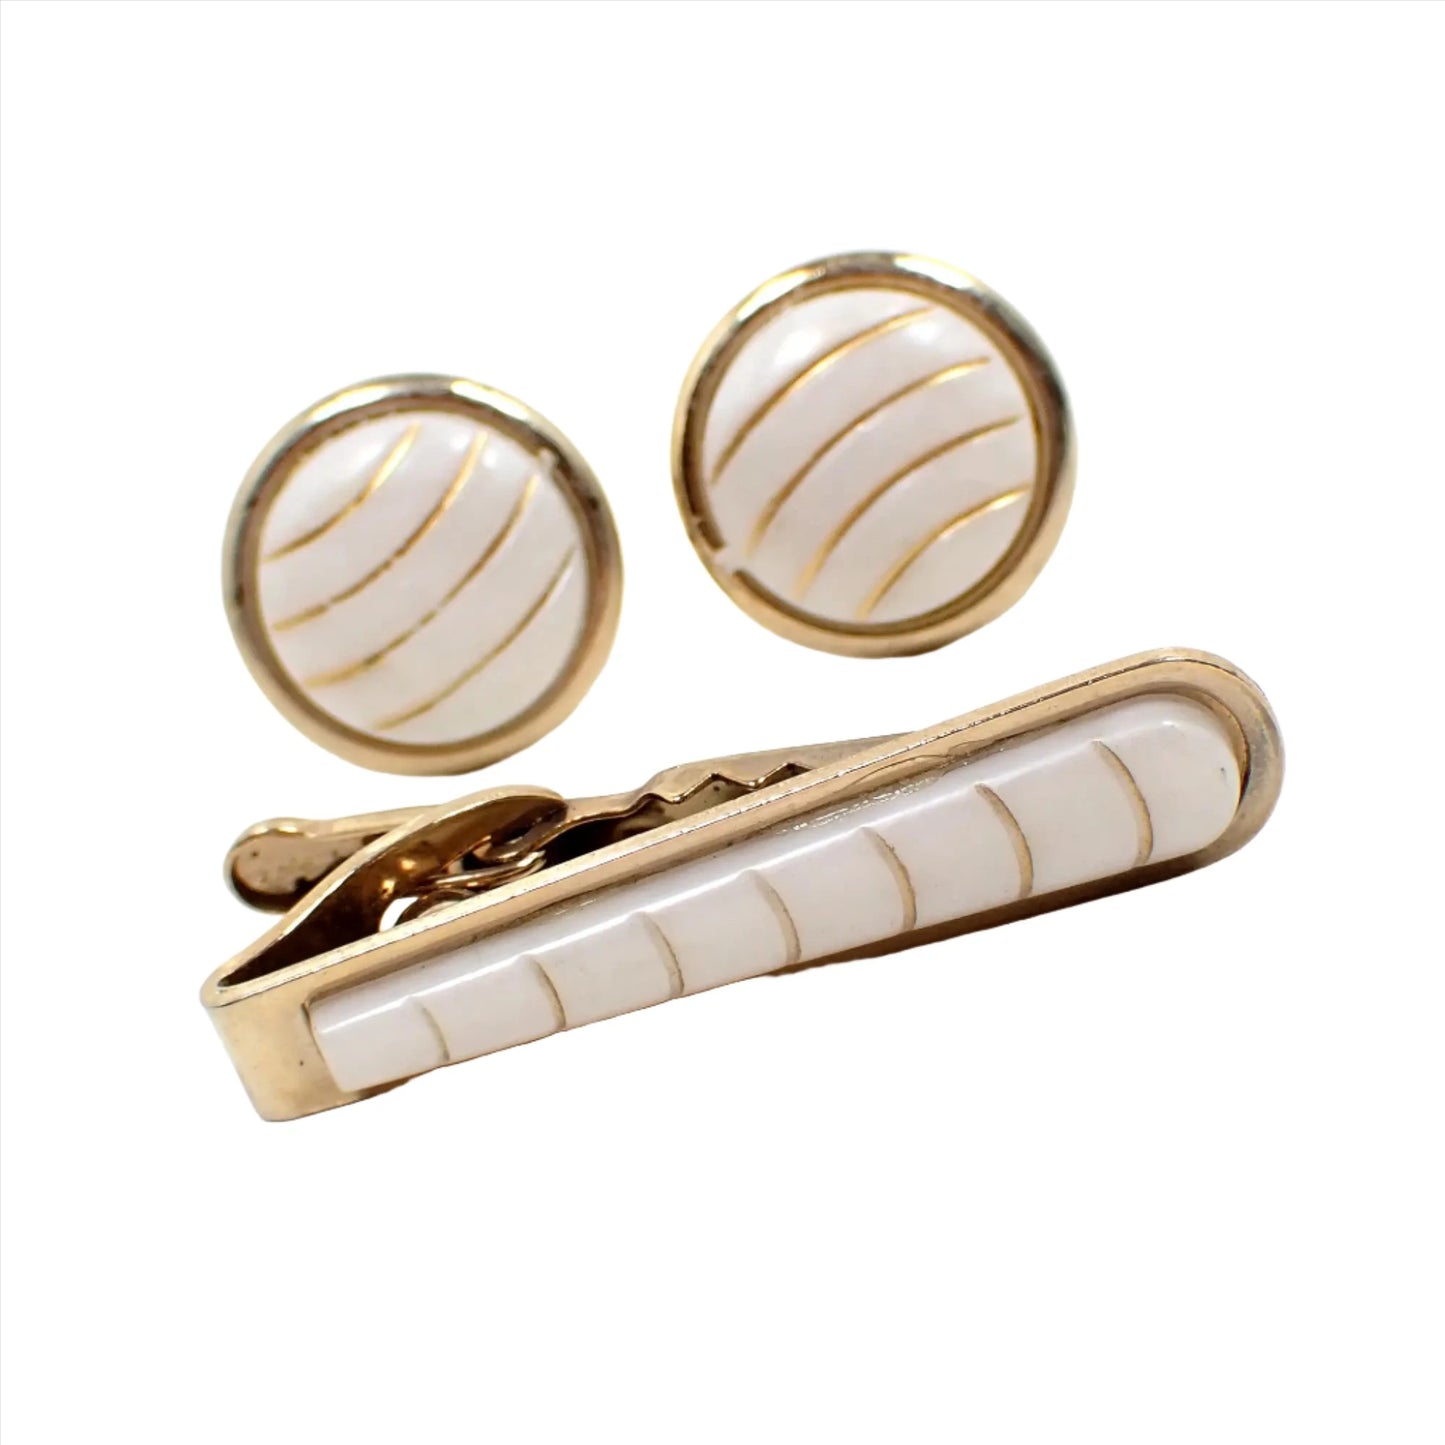 Angled view of the retro vintage tie clip and cufflinks men's jewelry set. The cufflinks are round with white plastic cabs on the front that have curved gold color painted stripes. The tie clip has a rounded end and has a matching plastic cab on the front.